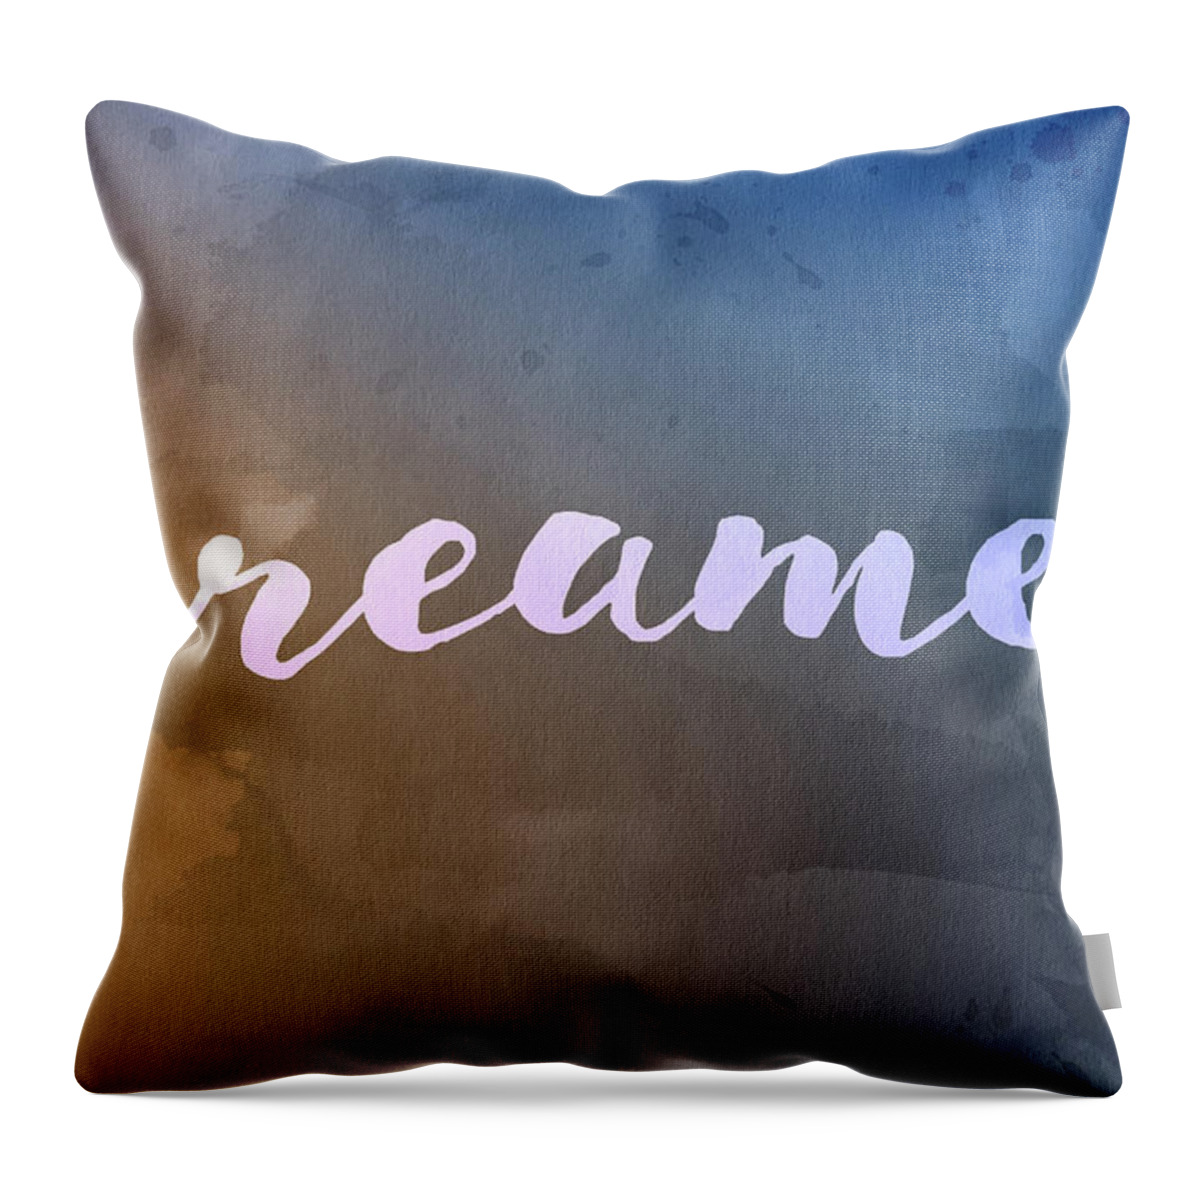 Watercolor Throw Pillow featuring the digital art Watercolor Art Dreamer by Amelia Pearn